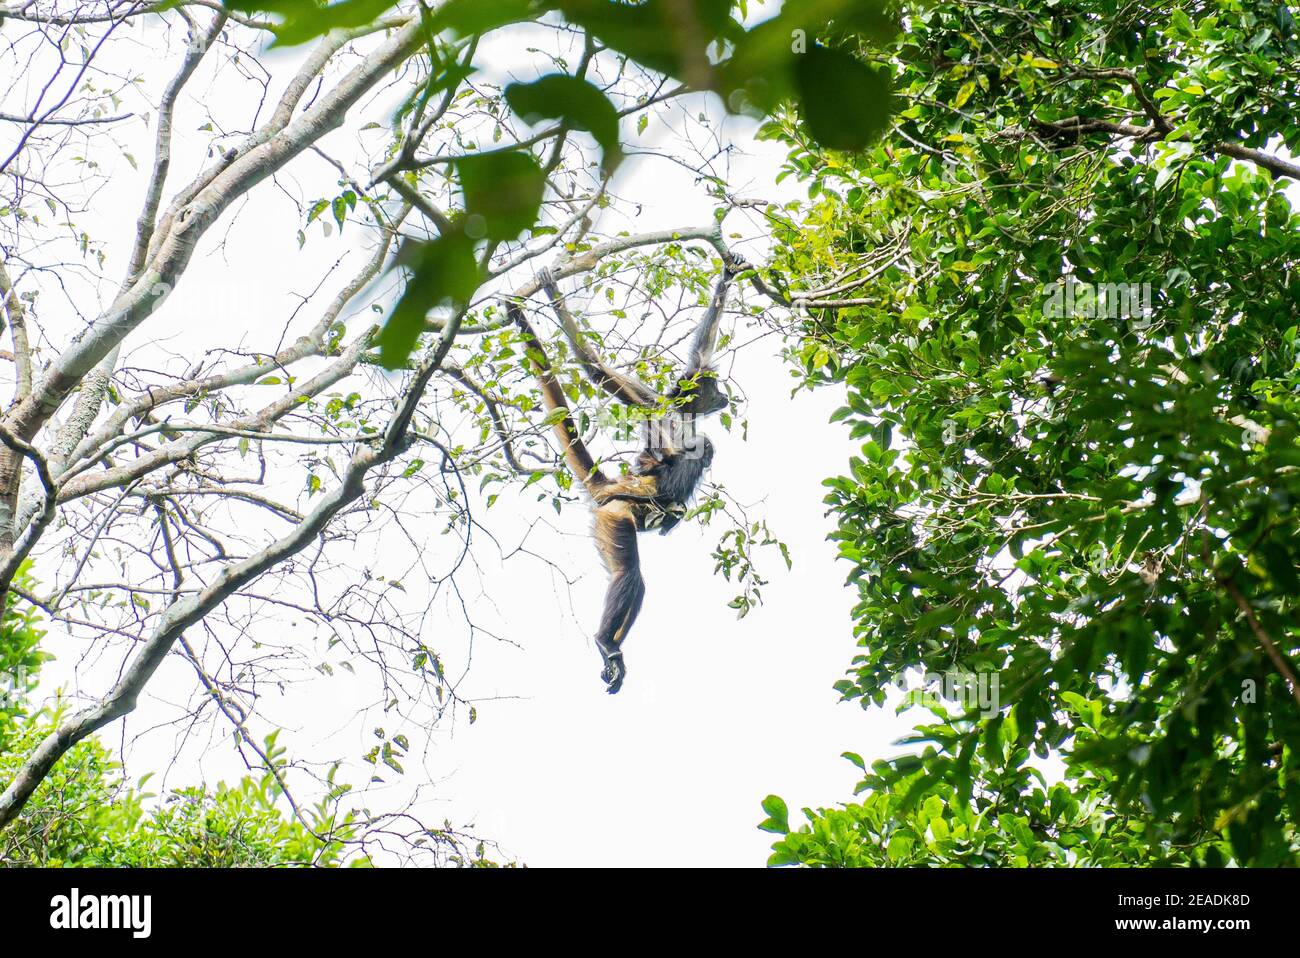 Spider Monkey with baby (Ateles geoffroyi) climbing a tree in Calakmul ruins, Mexico Yucatan Stock Photo